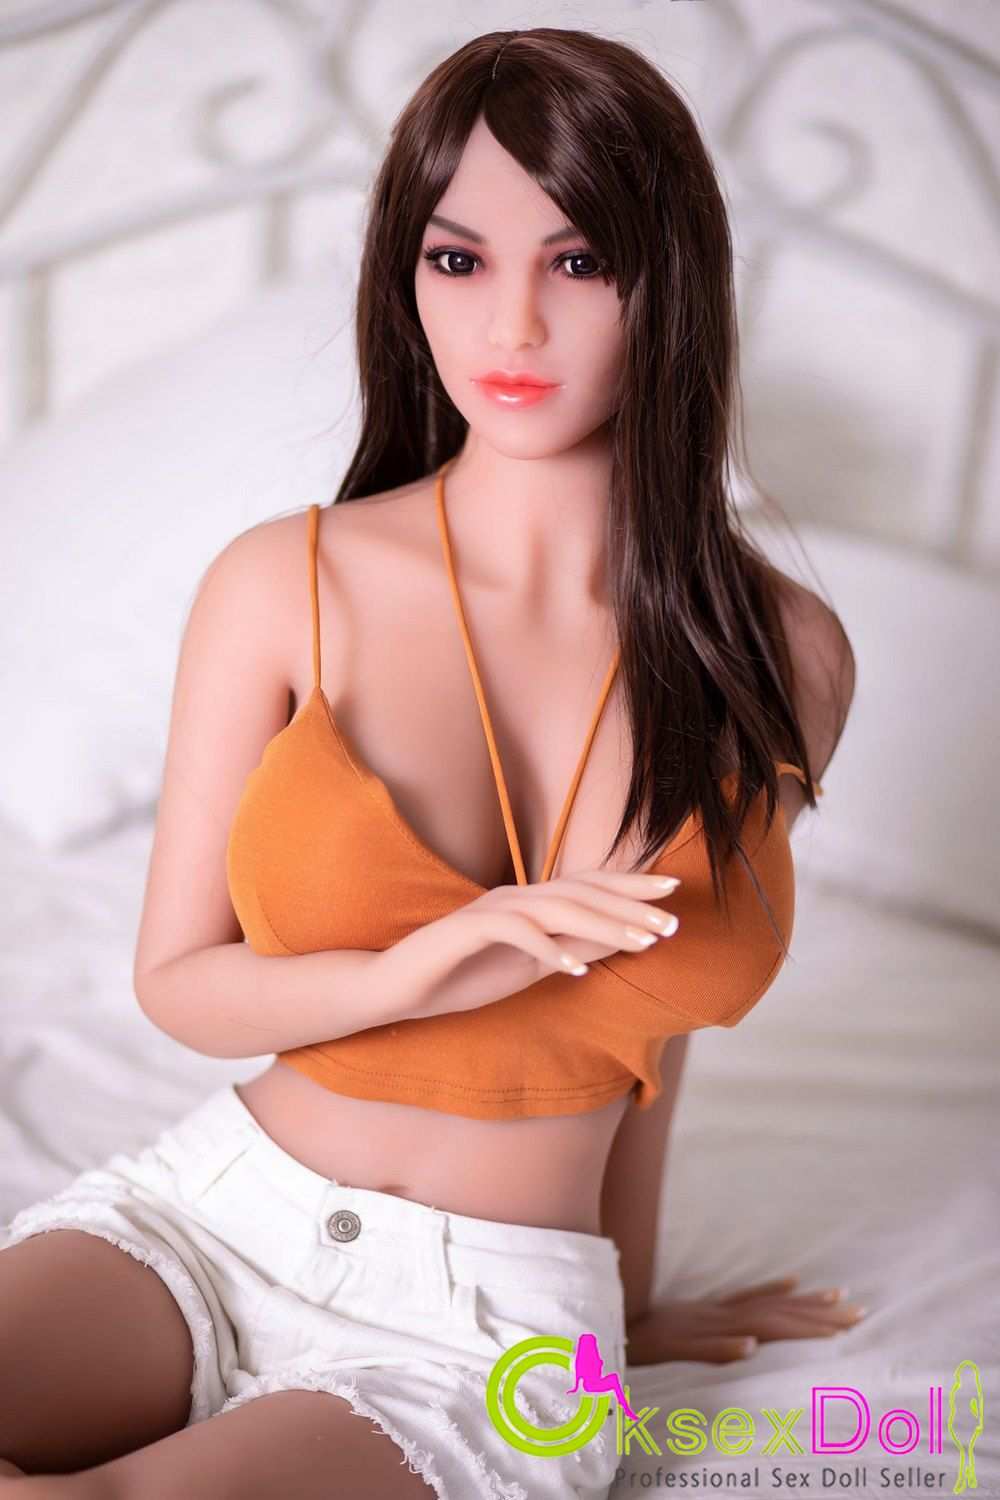 Young Lady Sex Doll Photos of Ivory